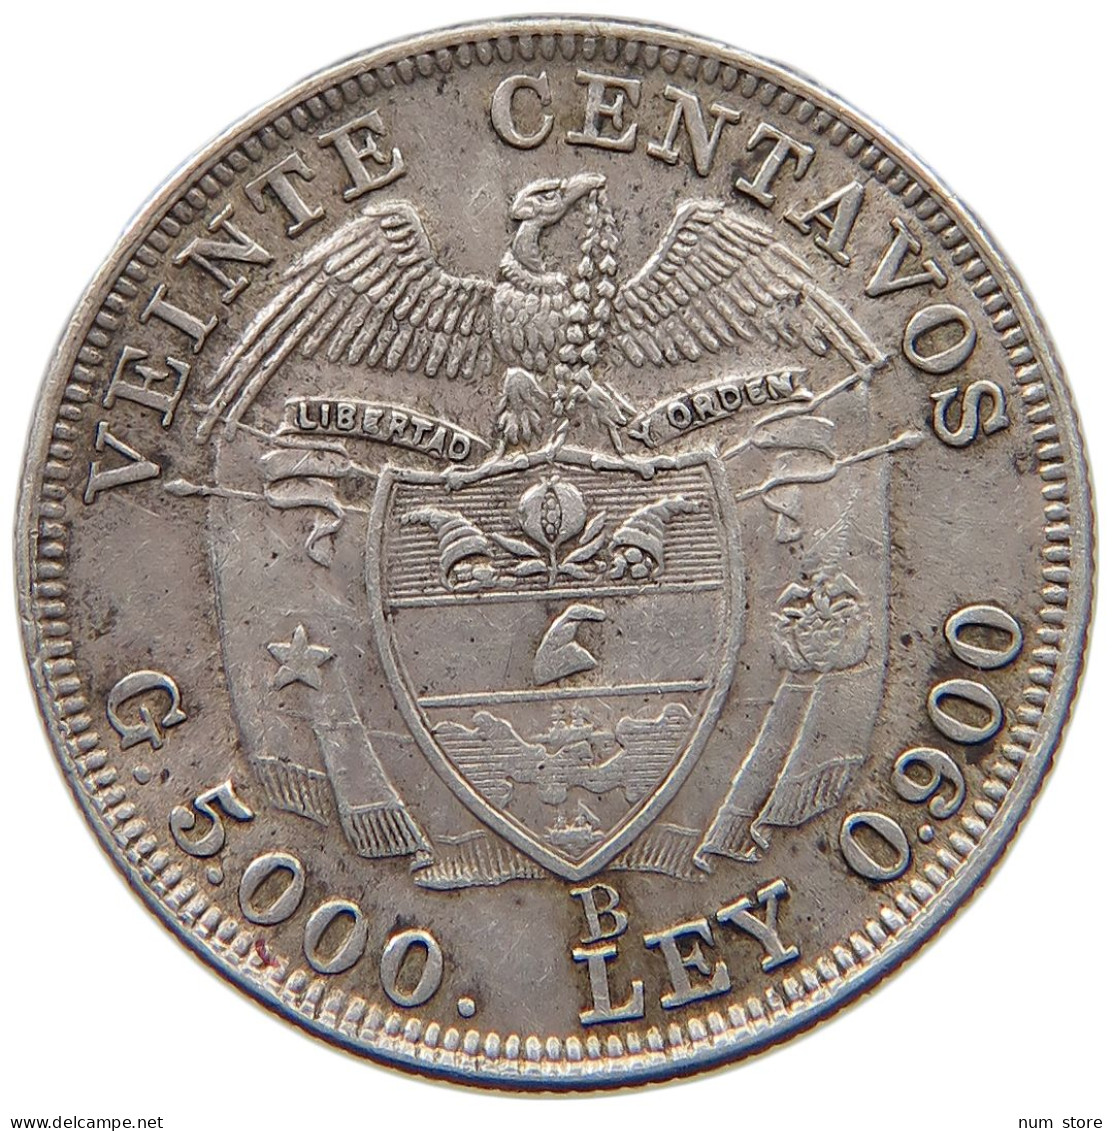 COLOMBIA 20 CENTAVOS 1933 OVERSTRUCK #t156 0033 - Colombie